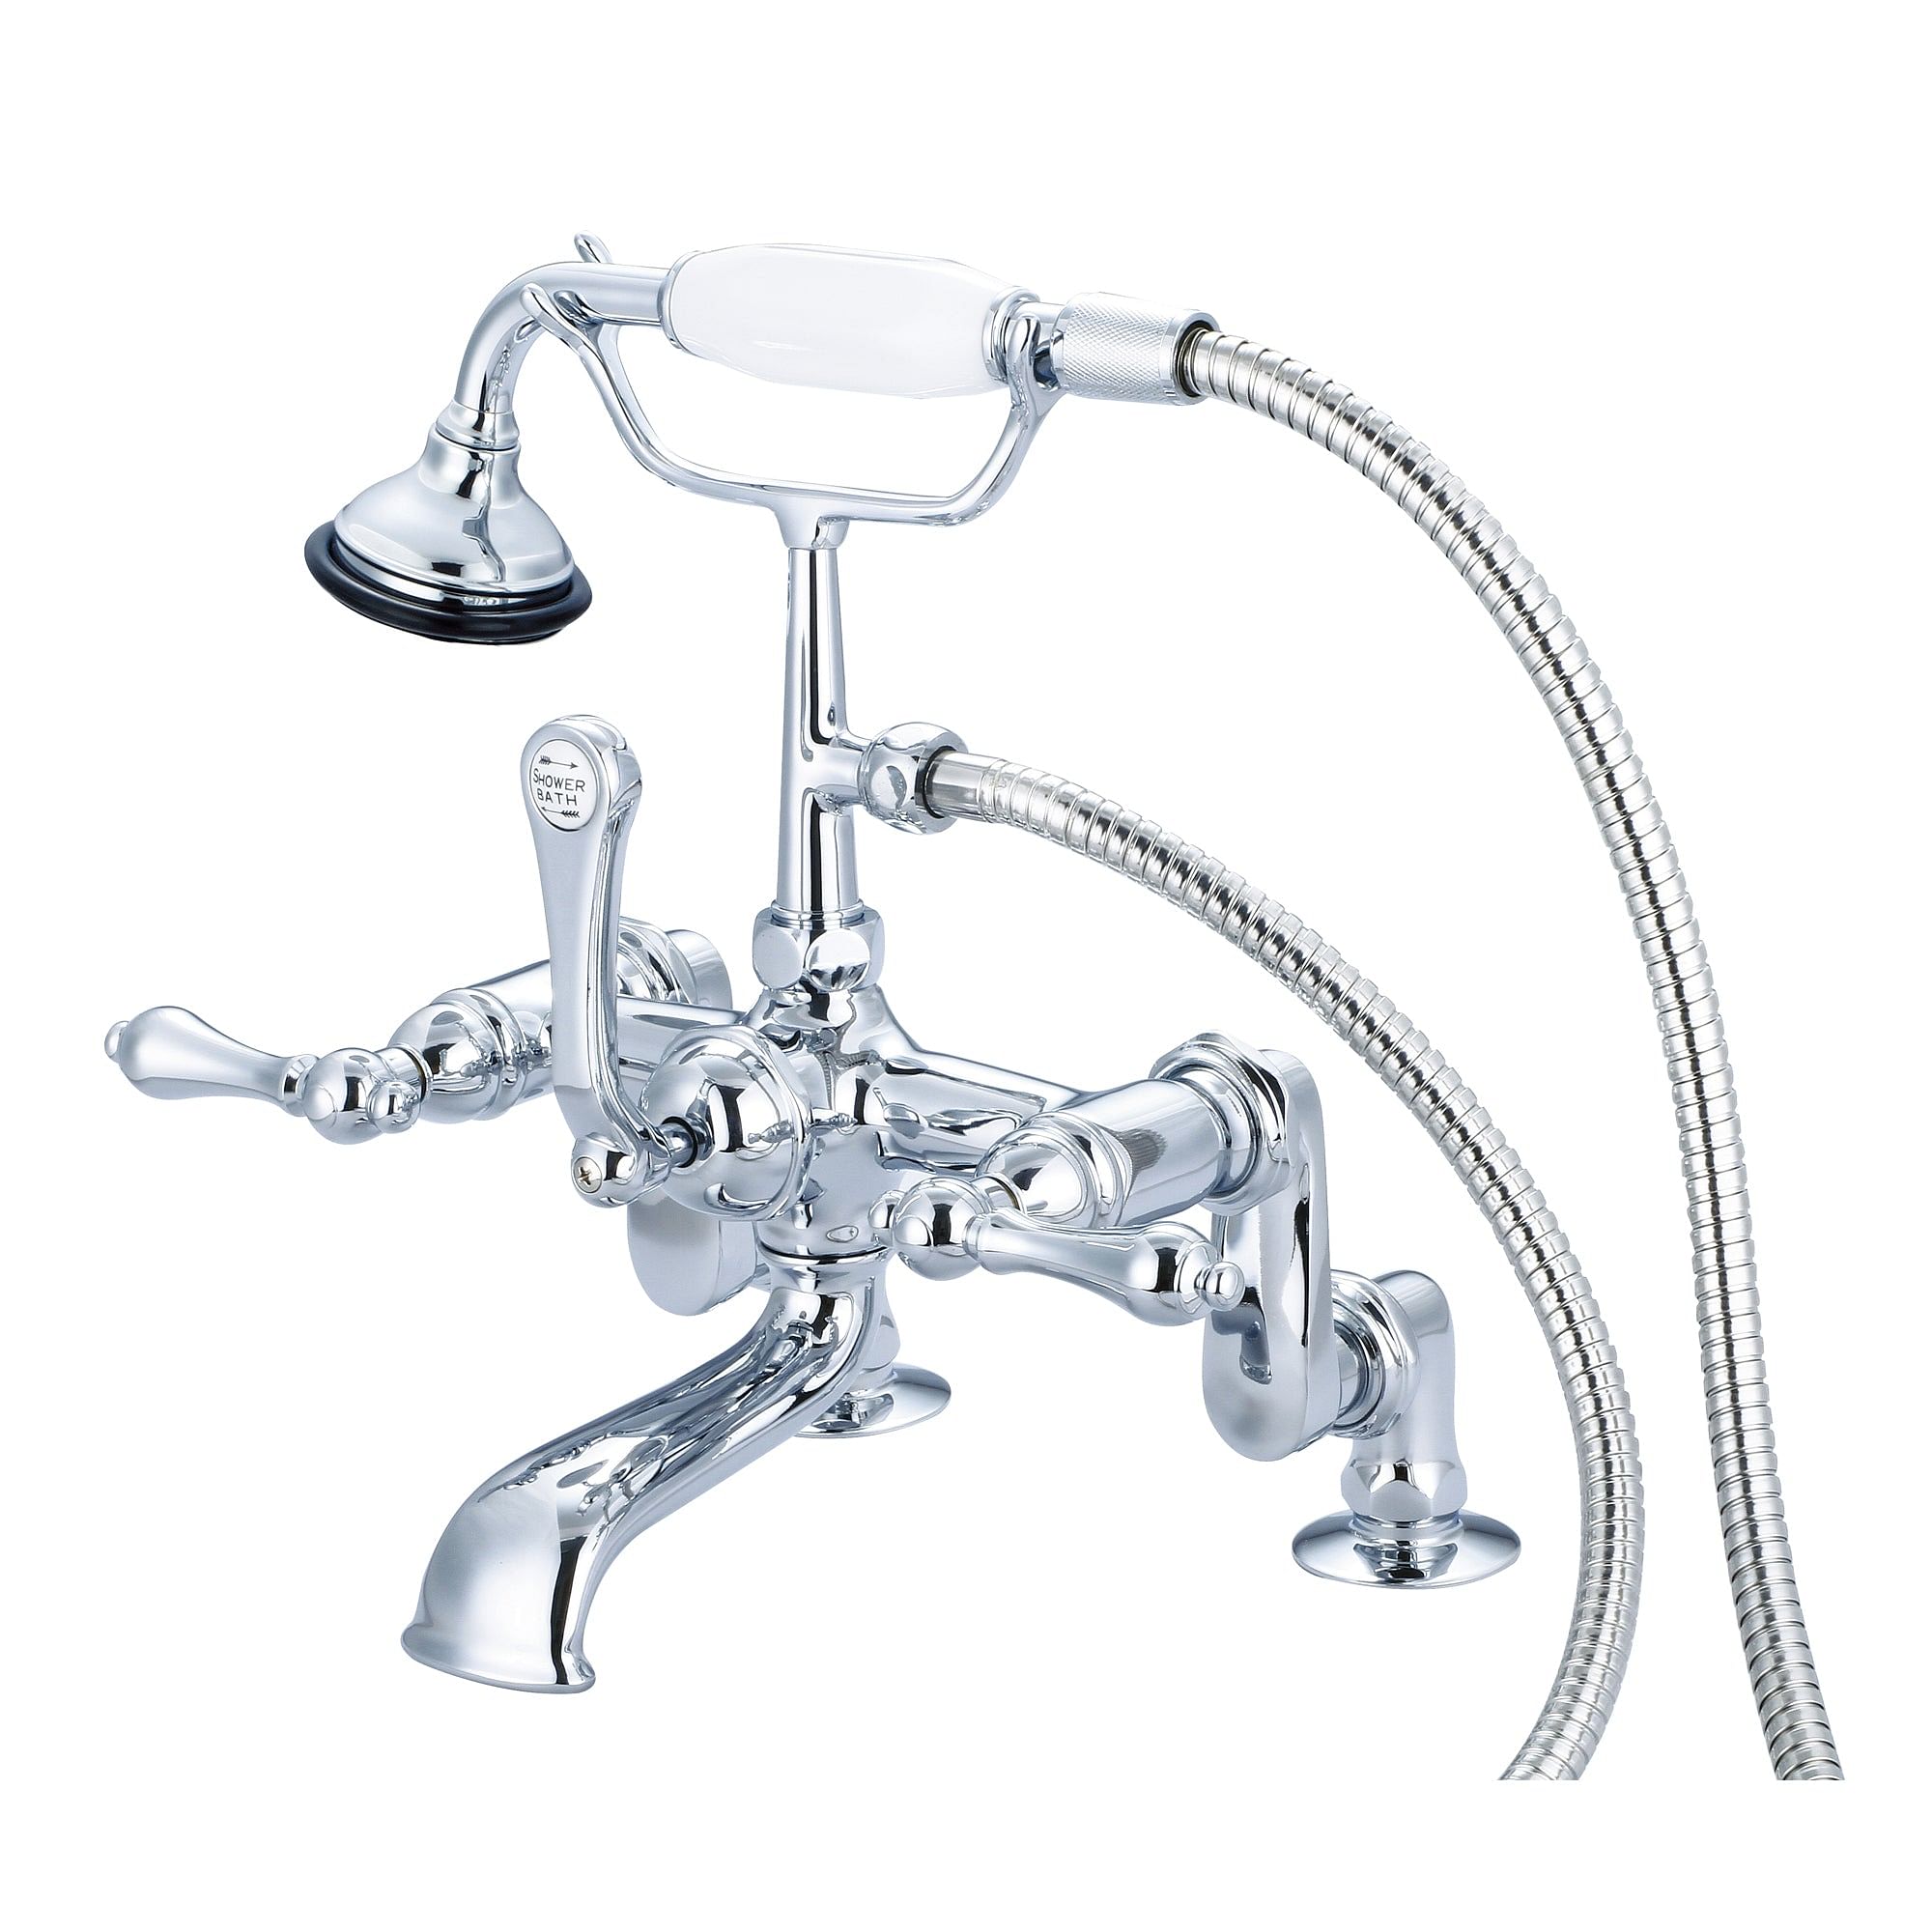 Vintage Classic Adjustable Center Deck Mount Tub Faucet With Handheld Shower in Chrome Finish With Metal Lever Handles Without Labels